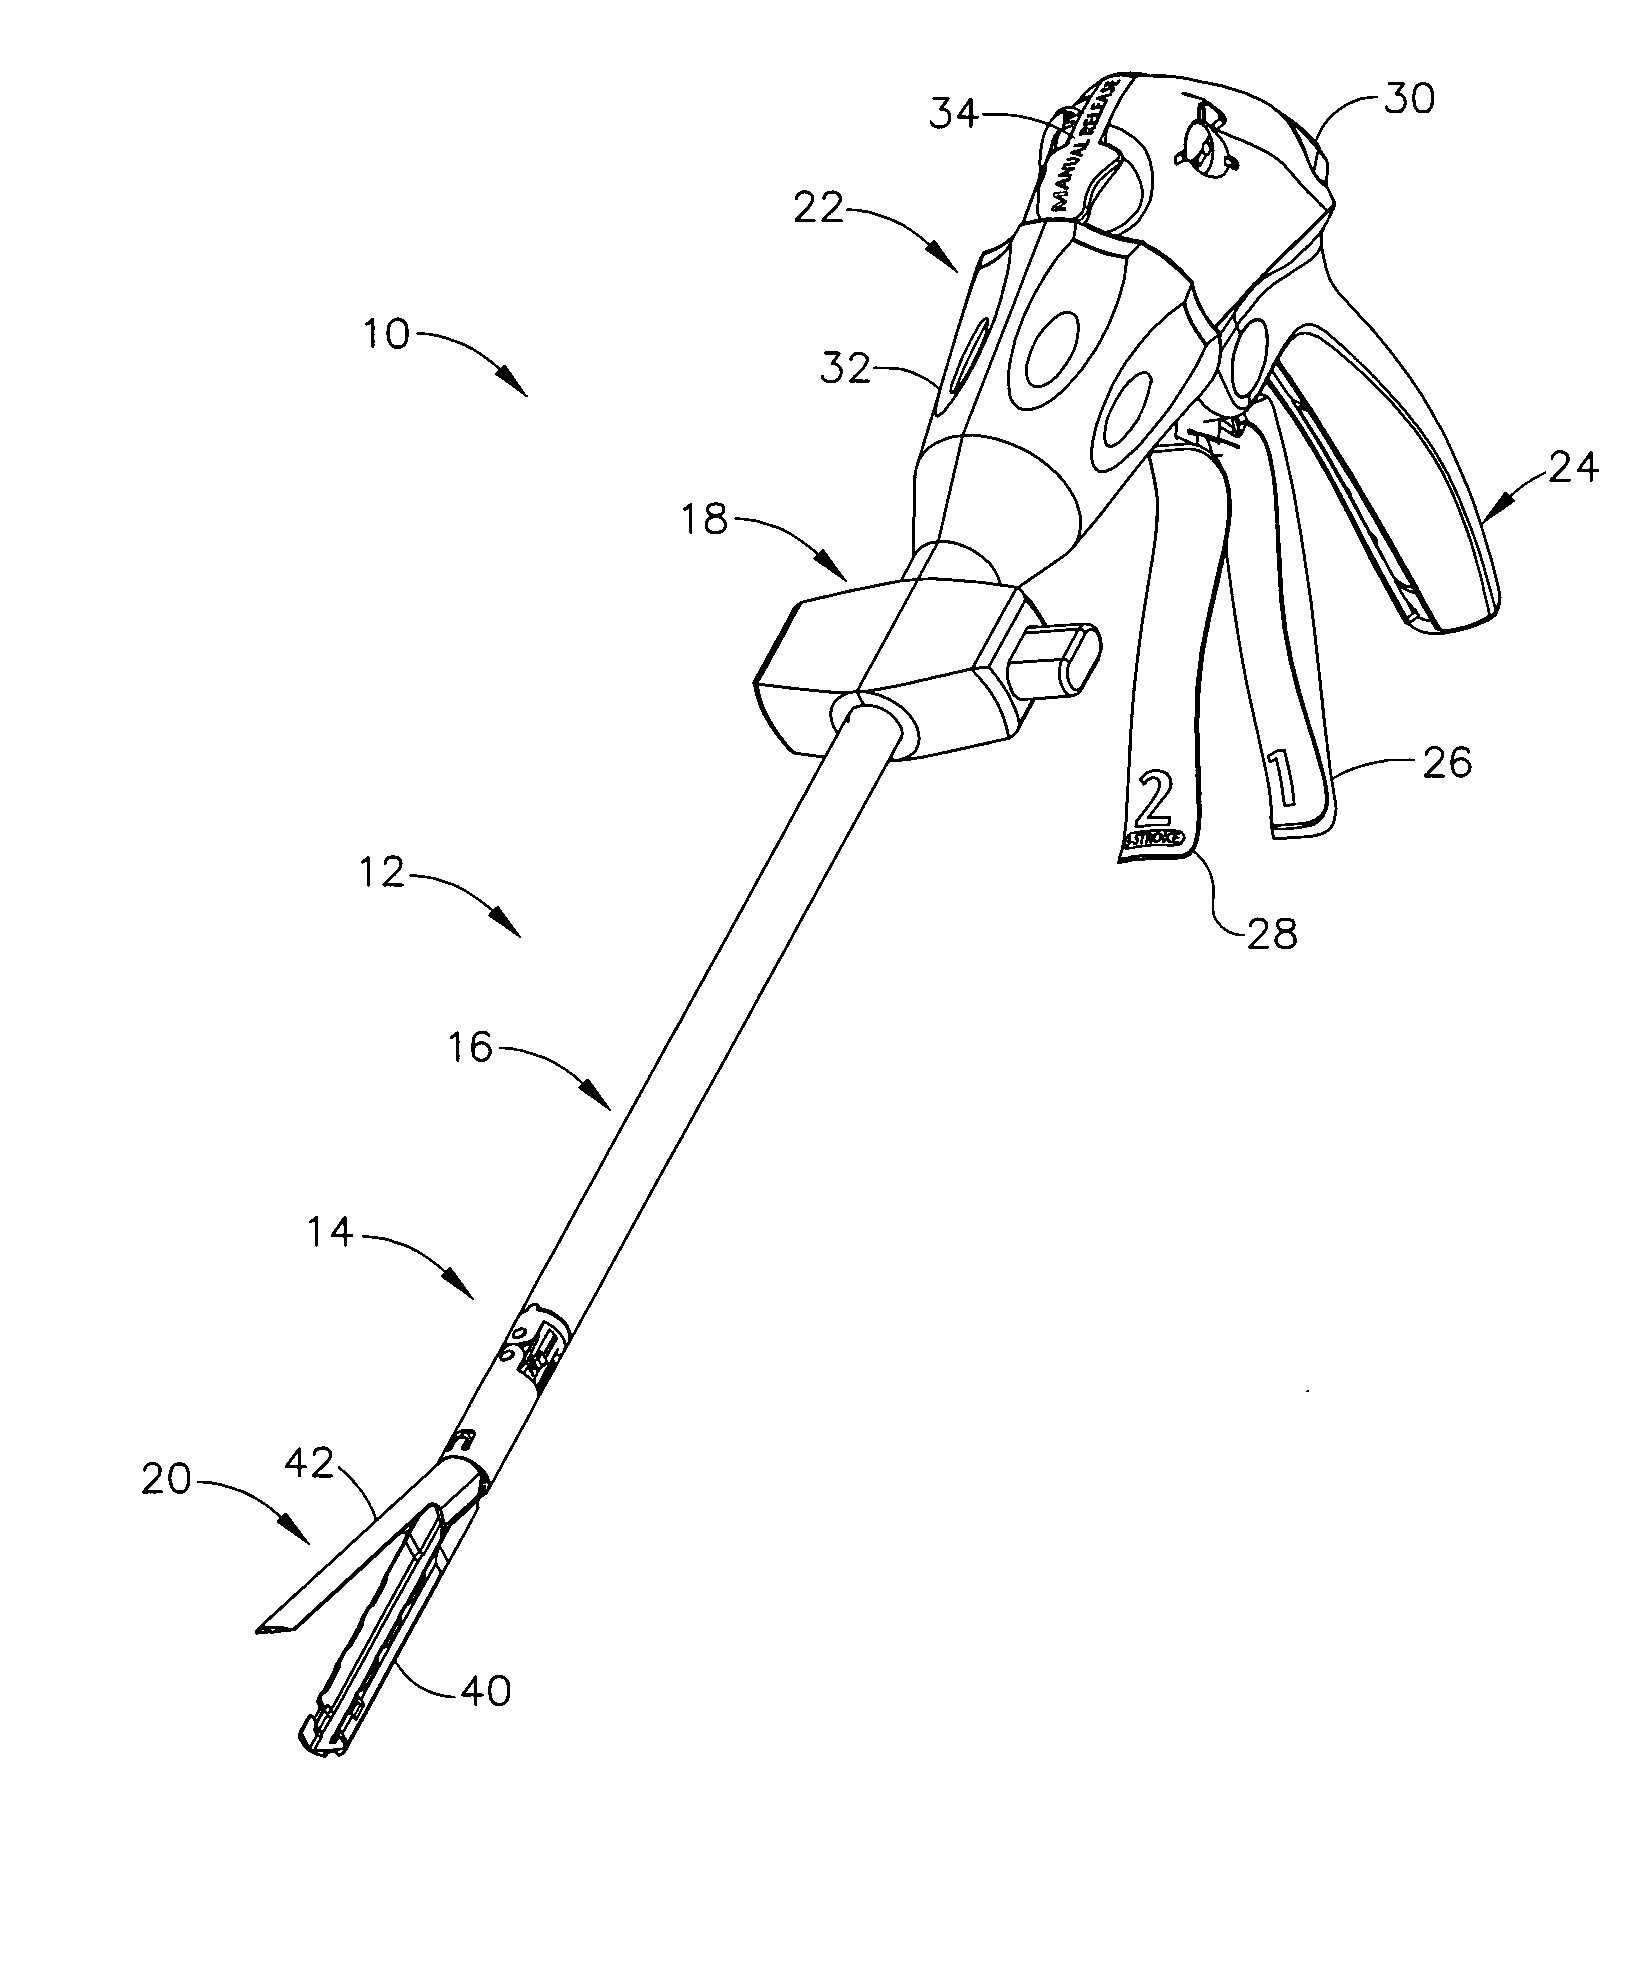 Surgical instrument with articulating shaft with double pivot closure and single pivot frame ground